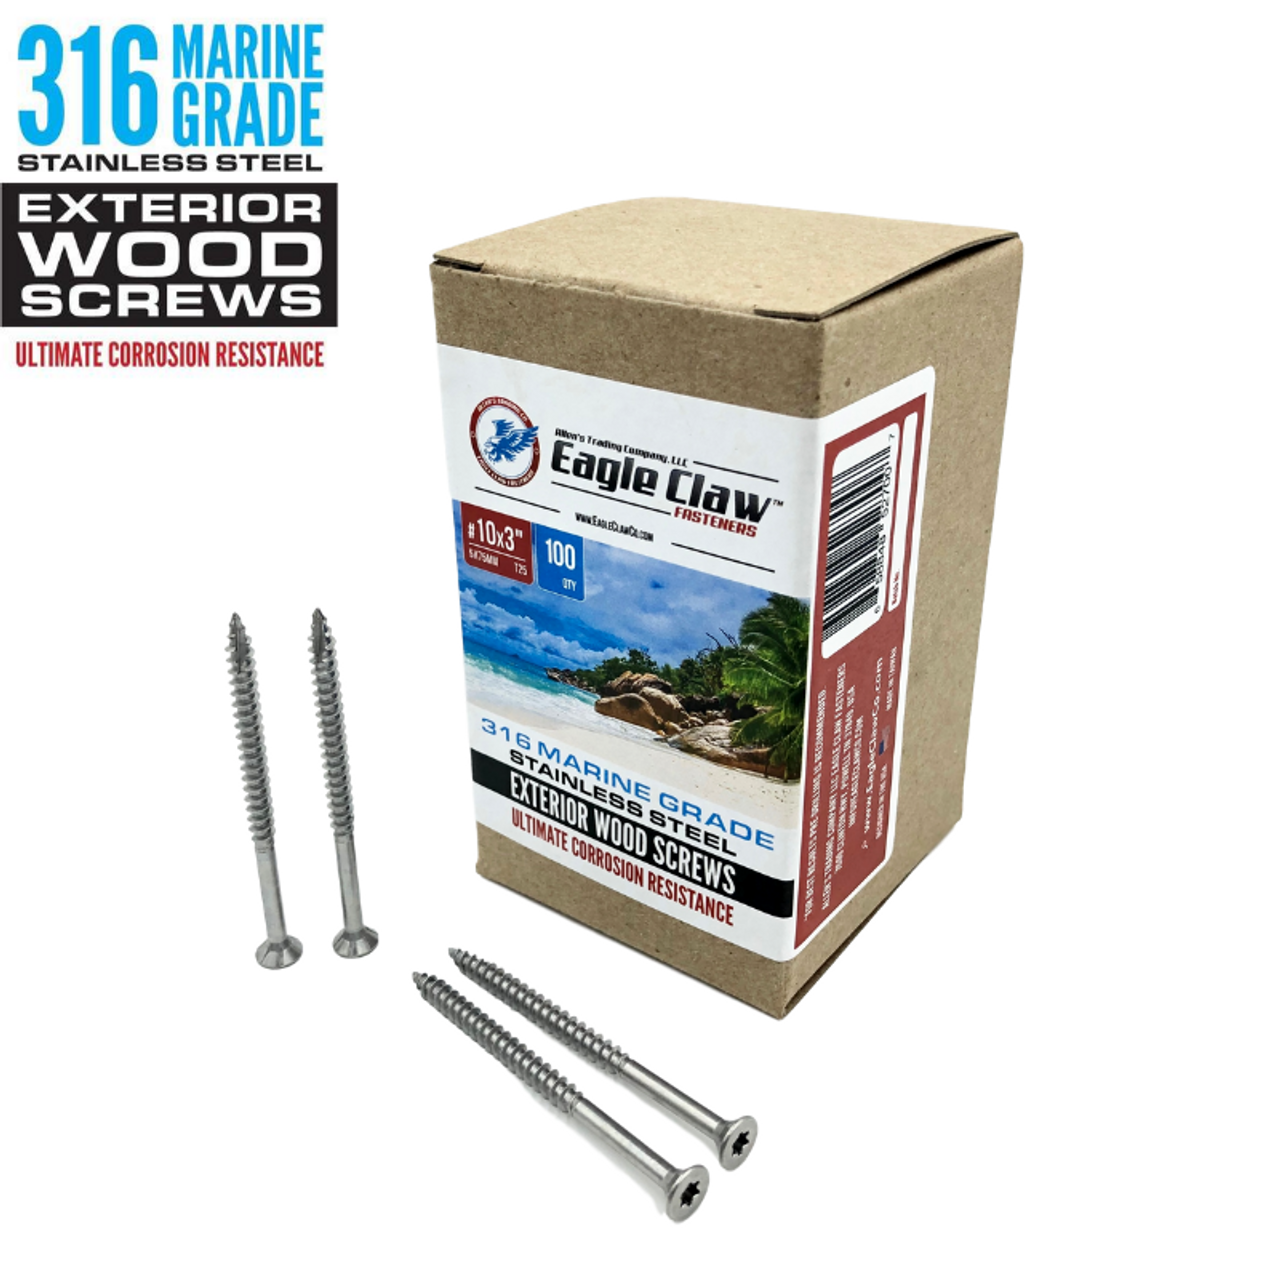 #10 x 3 inch 316 Marine Grade Stainless Steel Wood Screws 100 Pack T25 Star Drive Type 17 Point for Docks, Decks, Jetties, Fences or Any Coastal